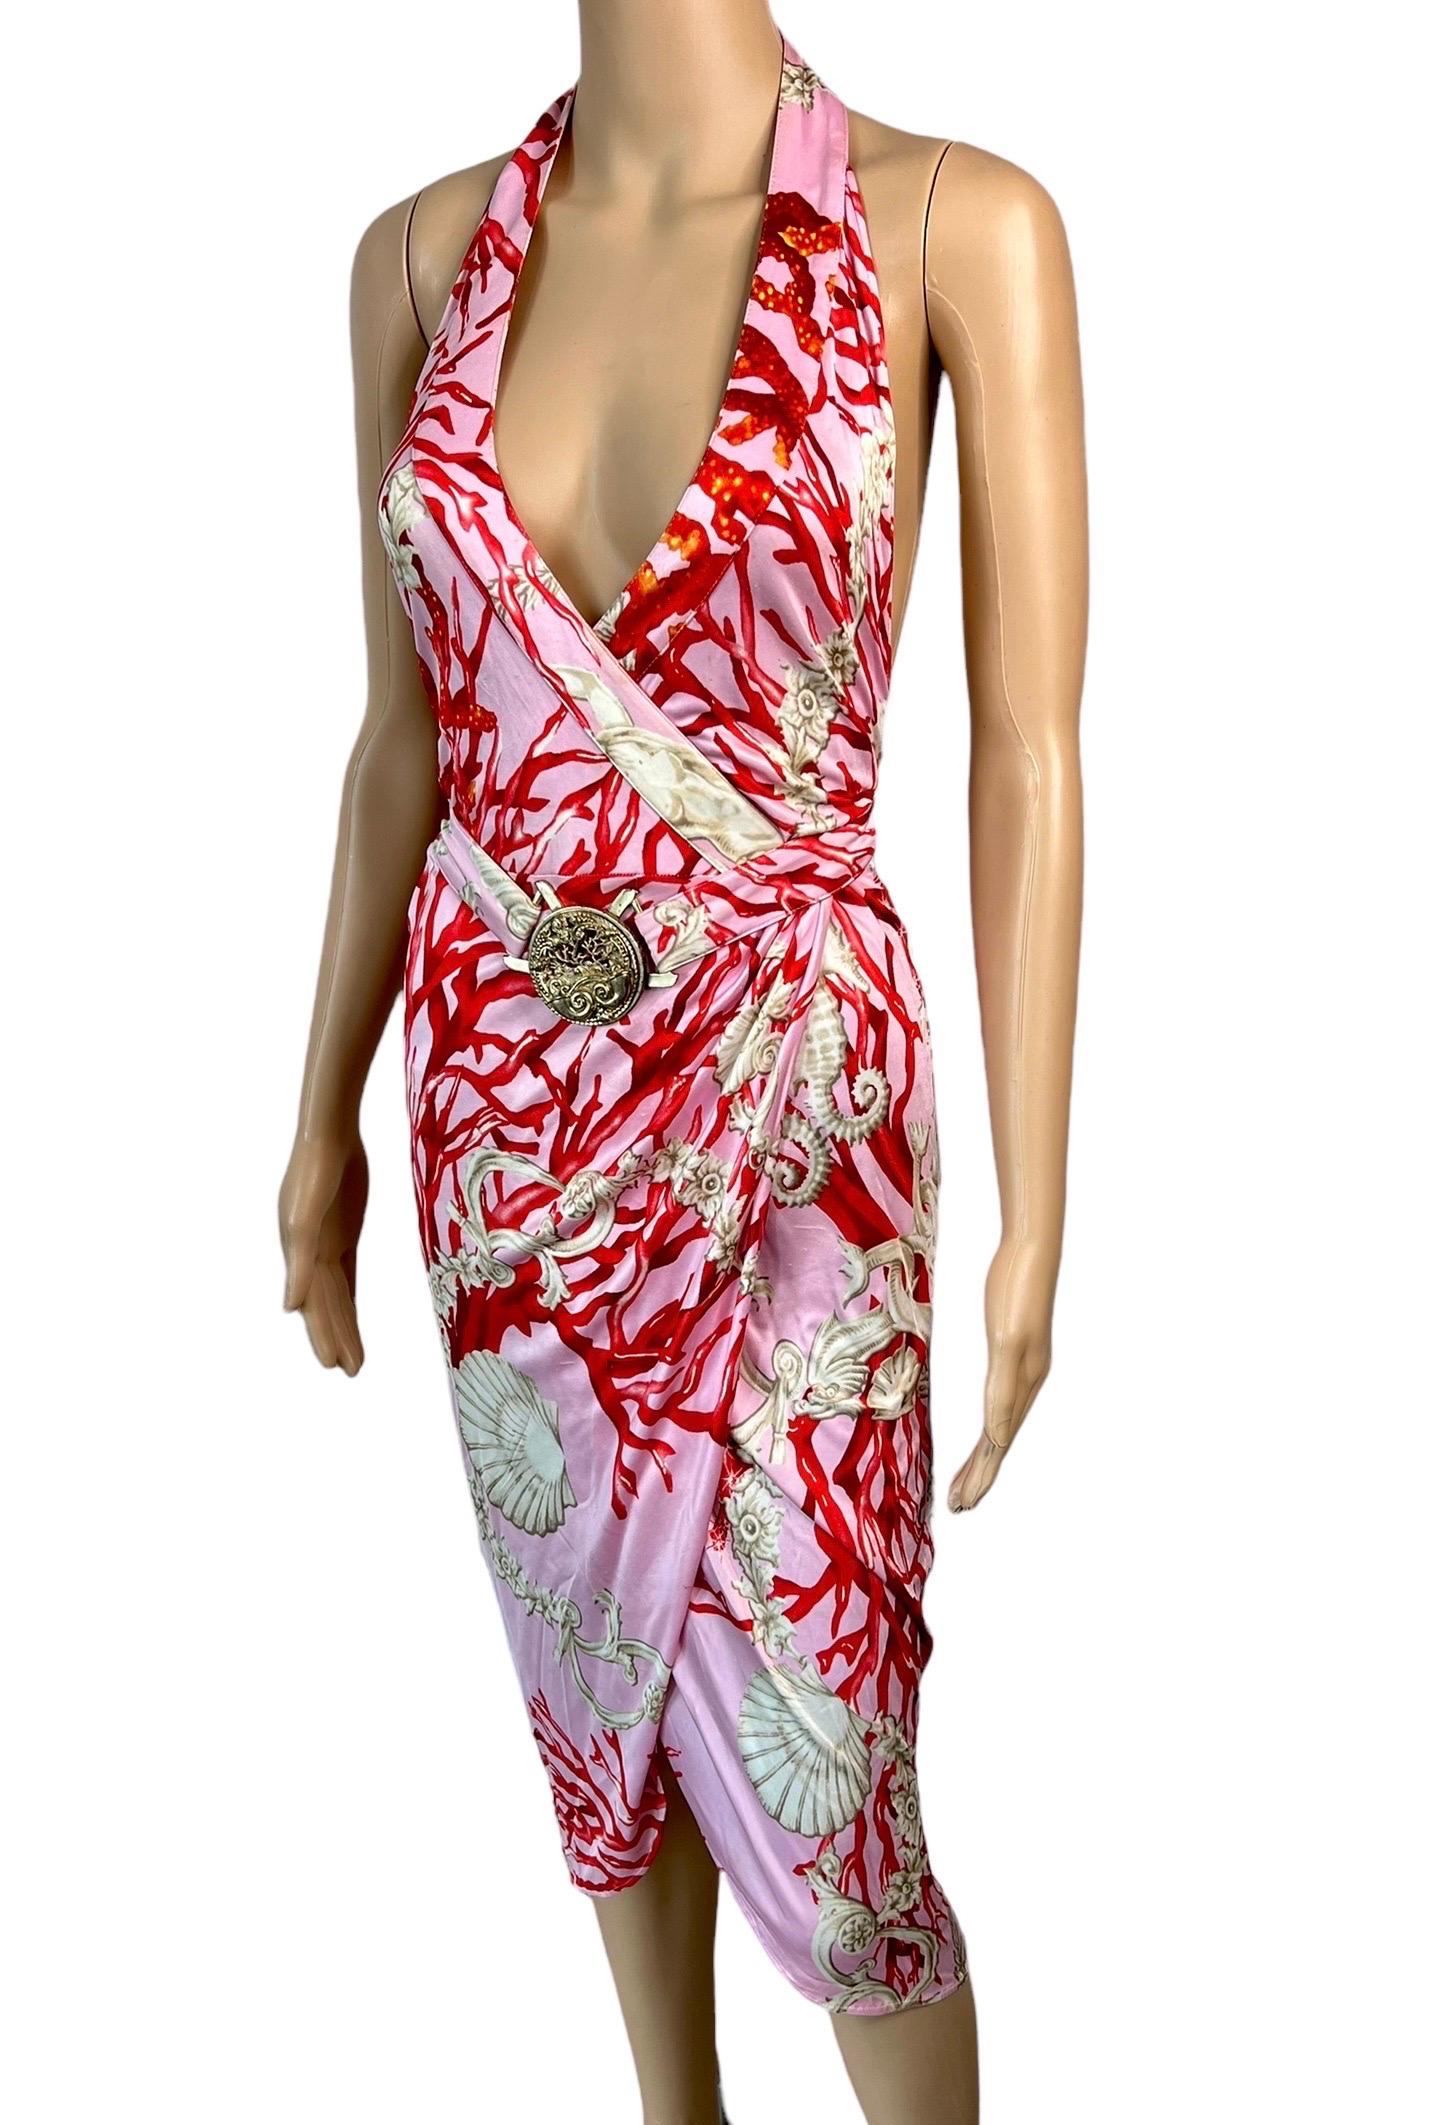 Versace S/S 2005 Plunging Neckline Backless Seashell Print Belted Wrap Dress IT 42

Condition: pulls throughout as seen in the last photos and tarnishing on the metal belt.


